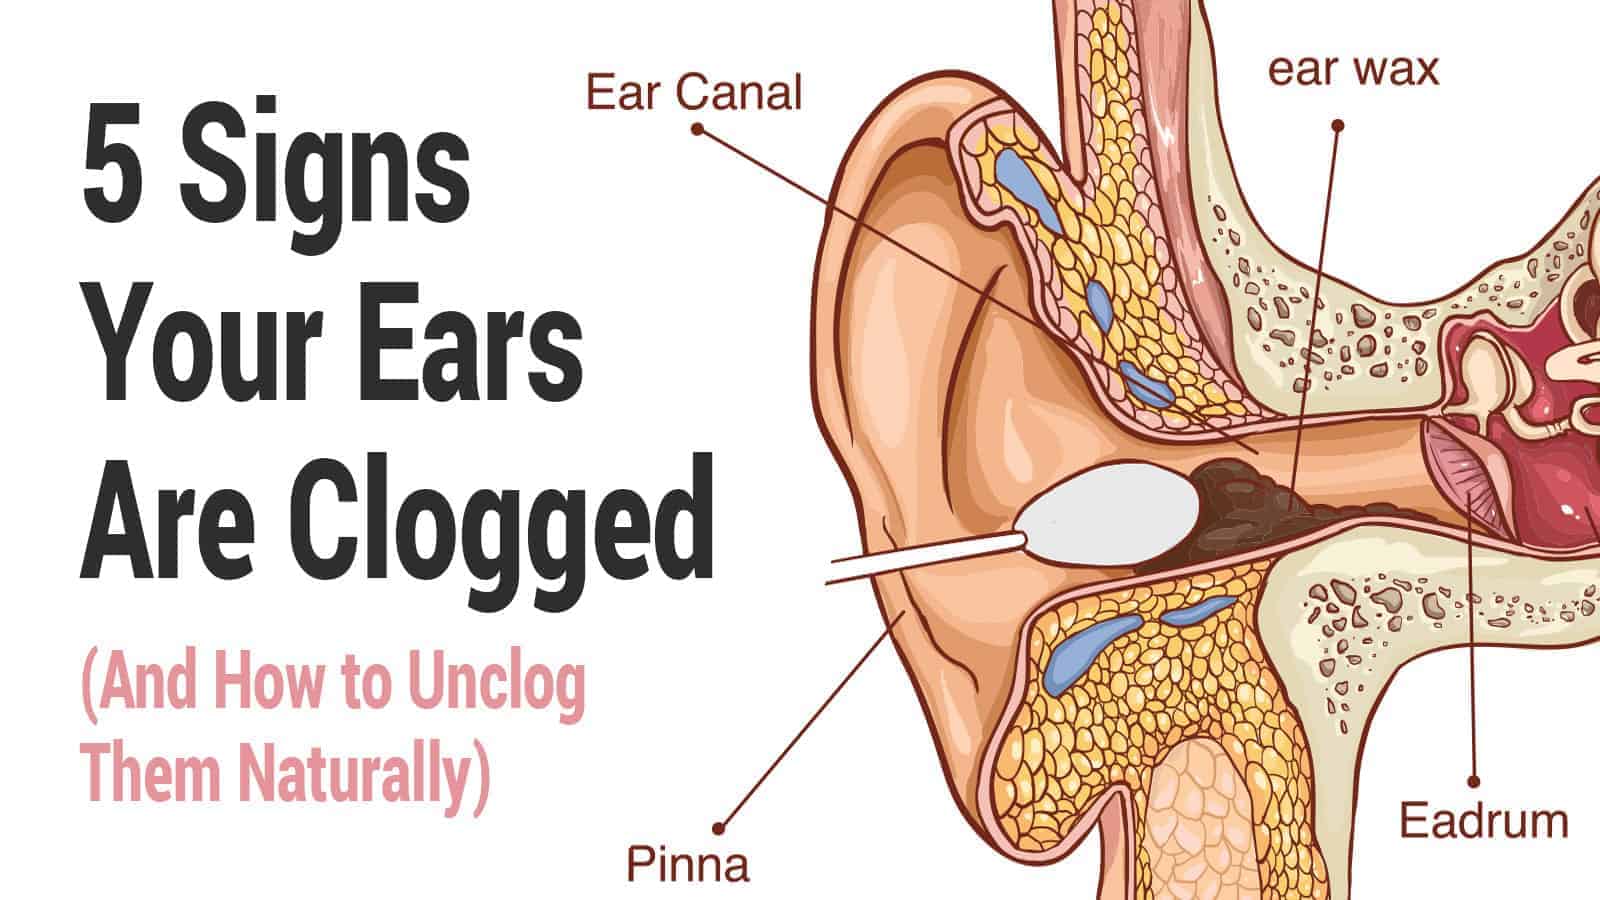 5 Signs Your Ears Are Clogged (And How to Unclog Them Naturally)